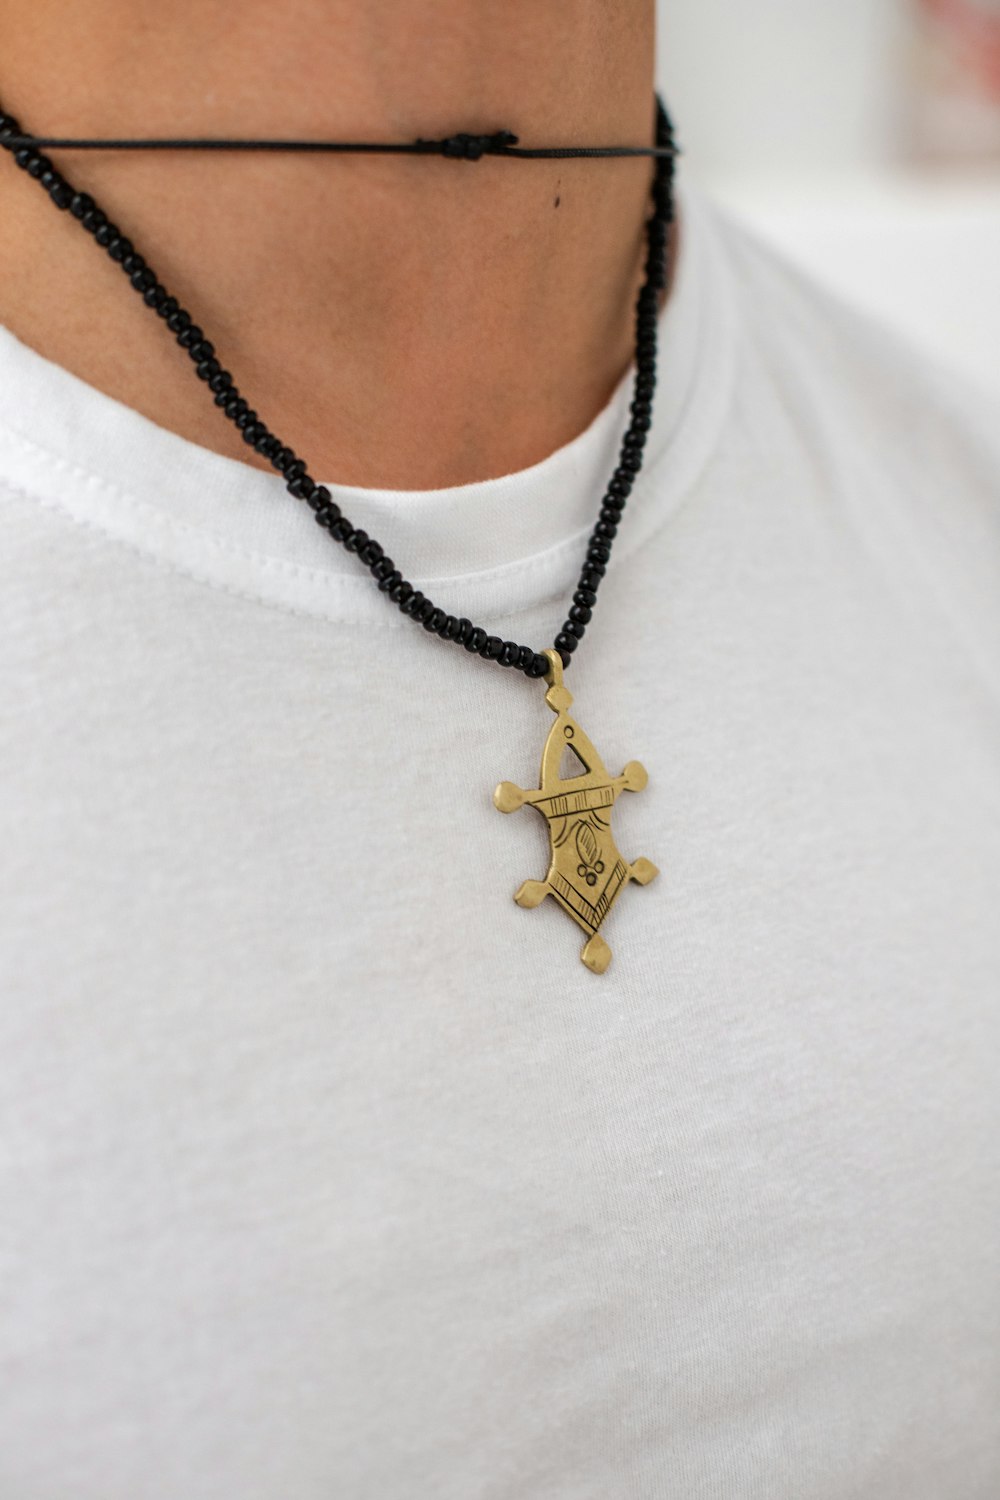 a man wearing a necklace with a cross on it